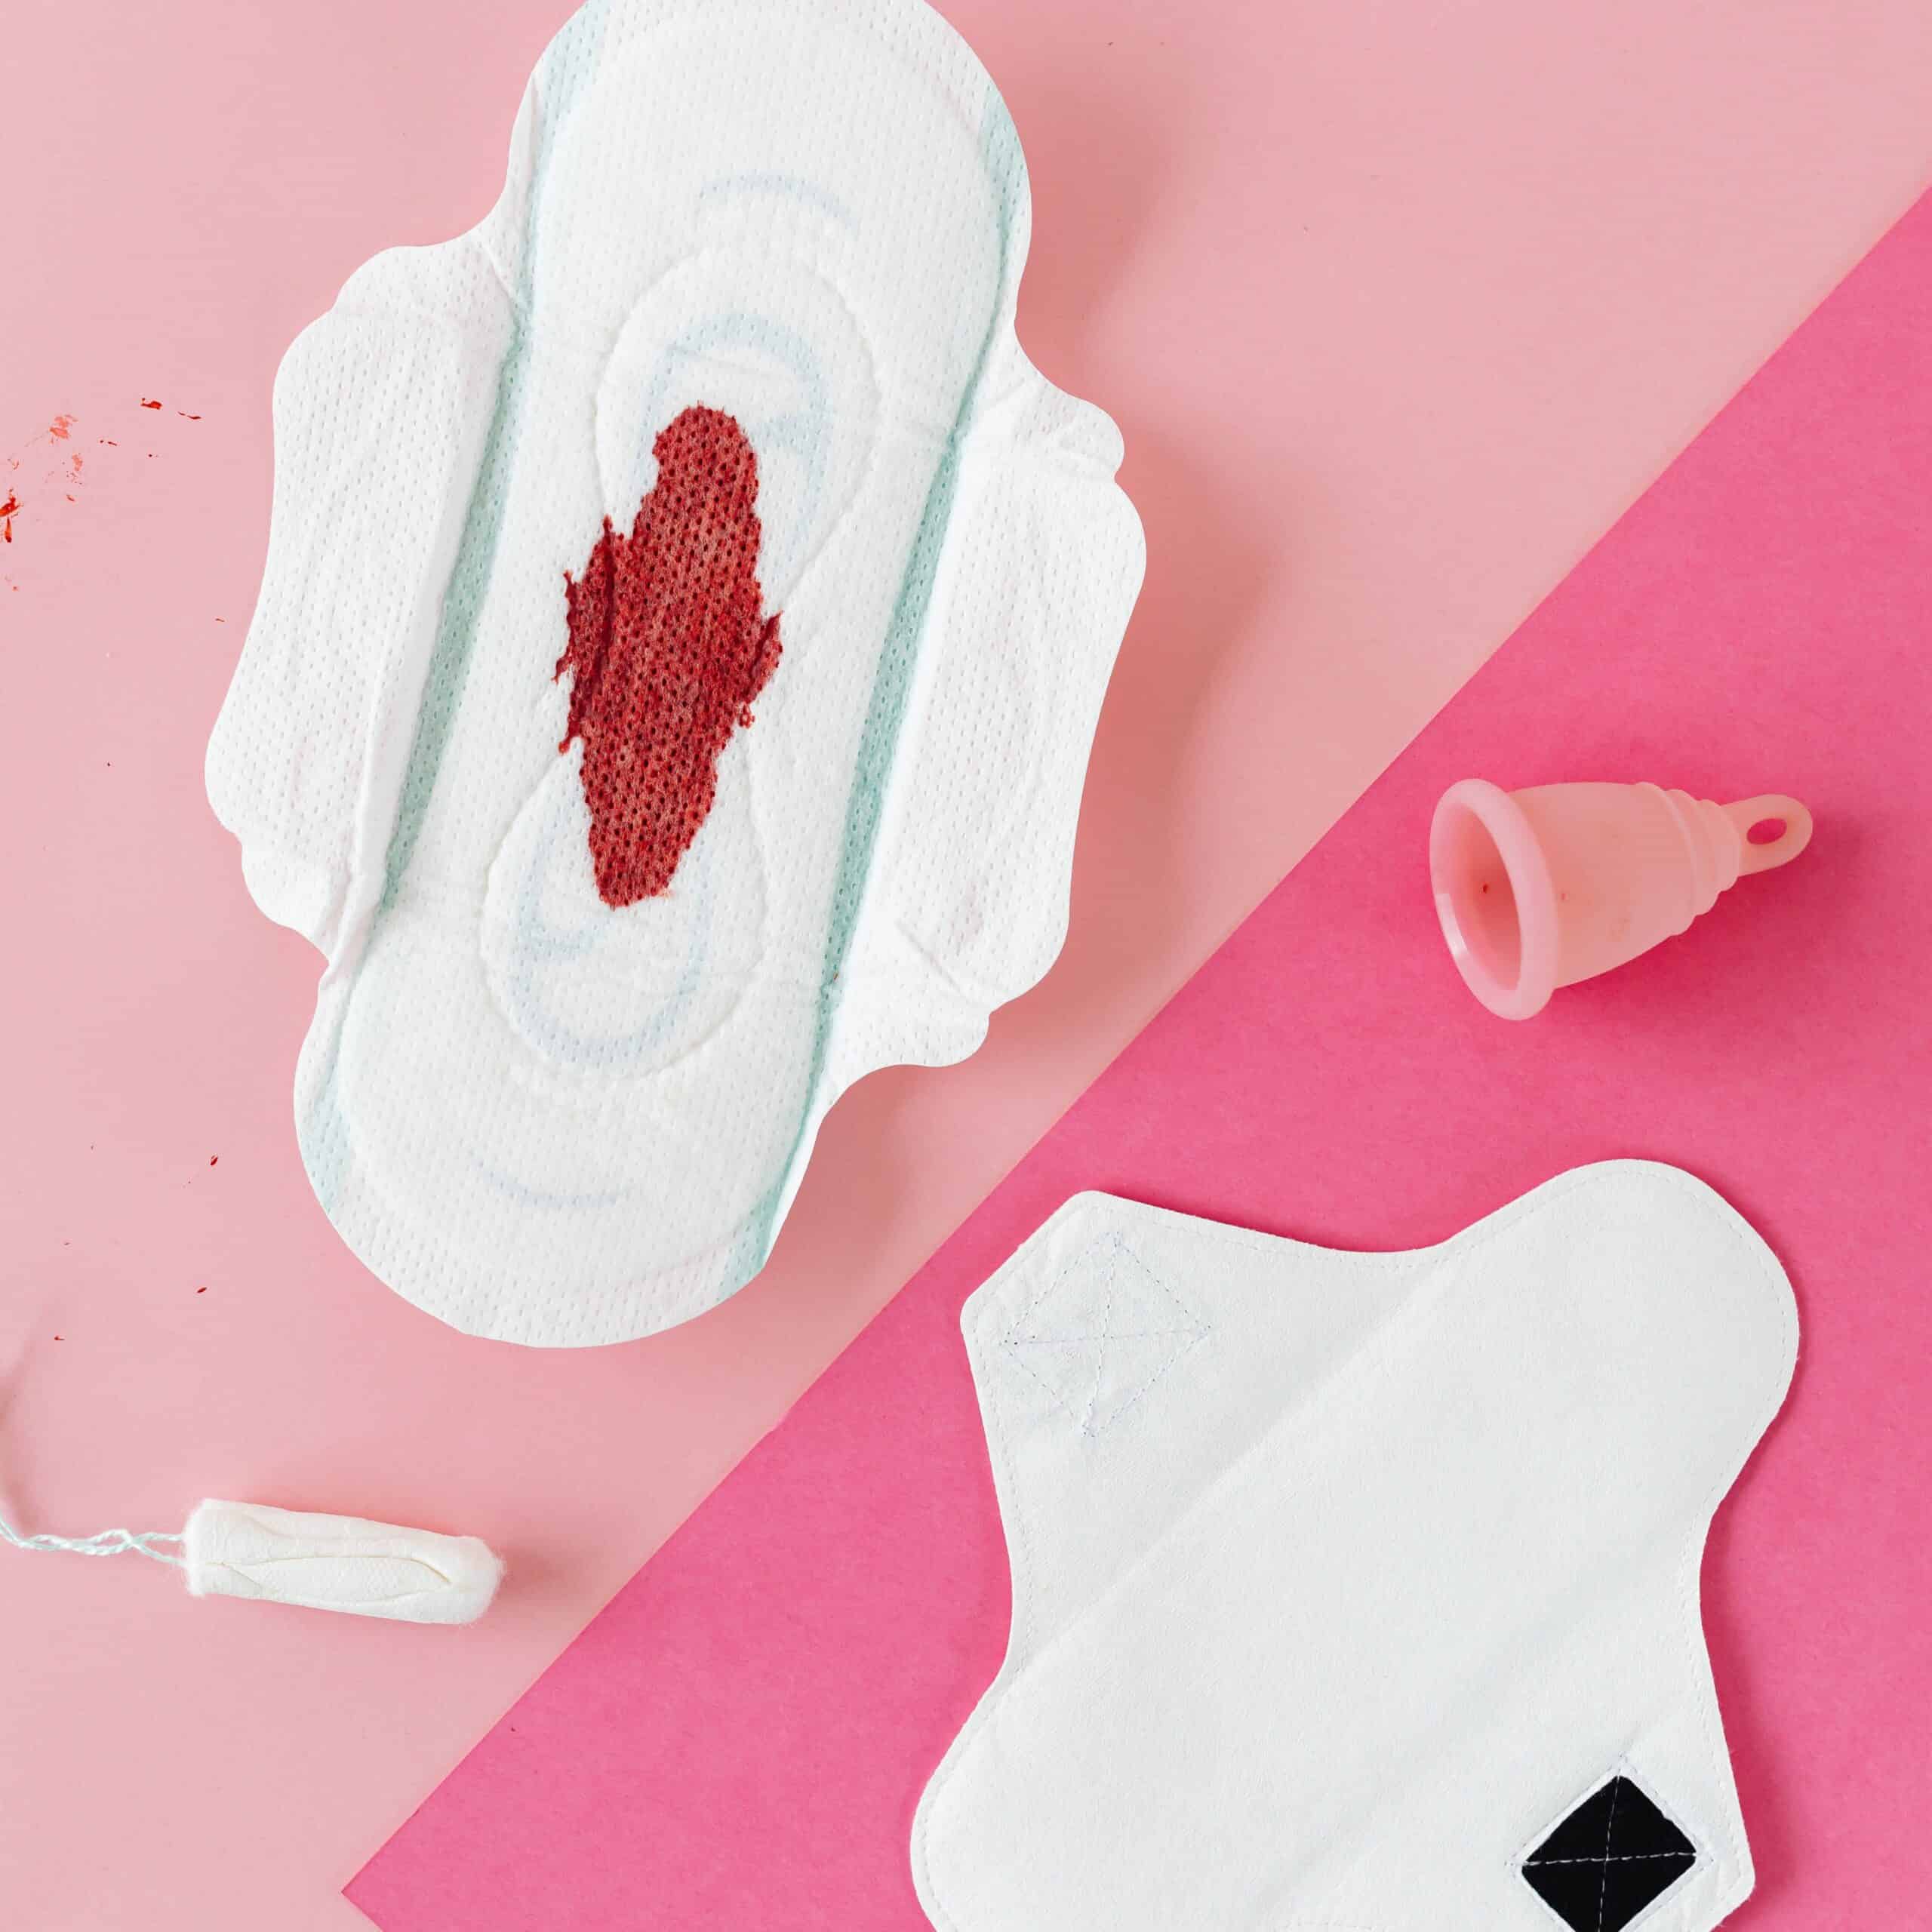 Menstrual cup, pad, tampon and panty liner lie together on a surface